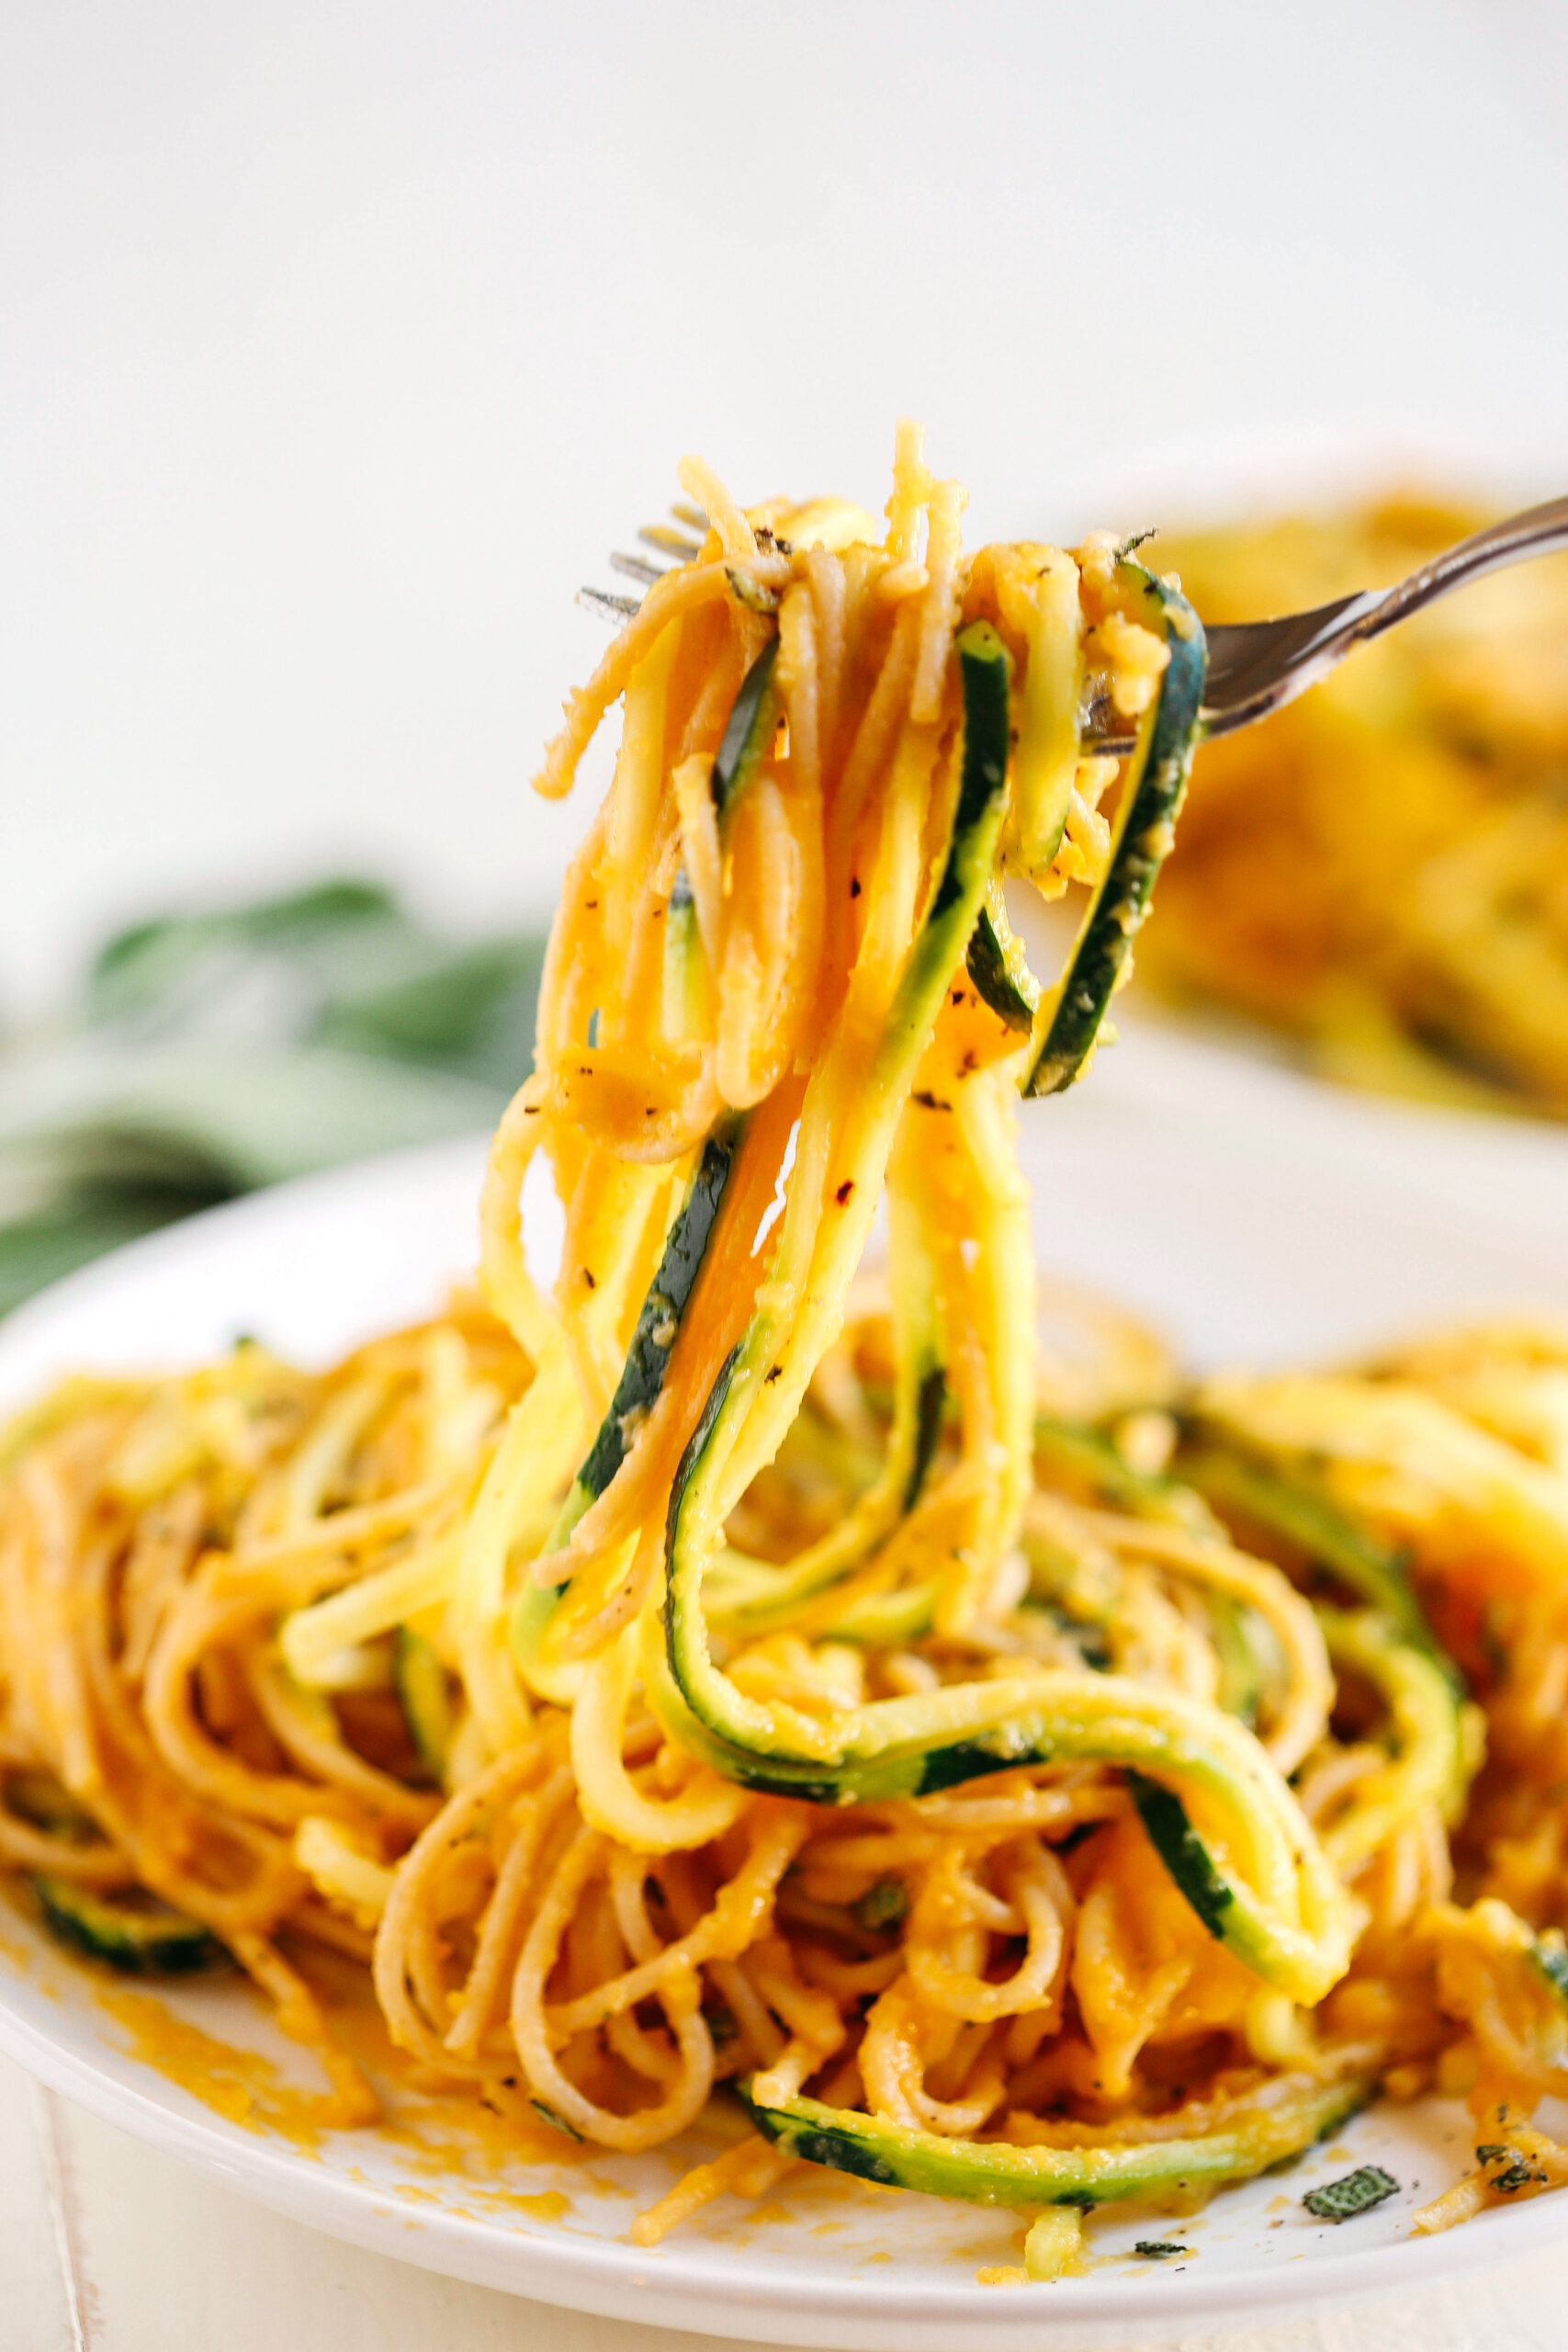 Butternut Squash & Sage Spaghetti with Zucchini Noodles that is healthy, delicious and can easily be made in just 30 minutes using a few simple ingredients!